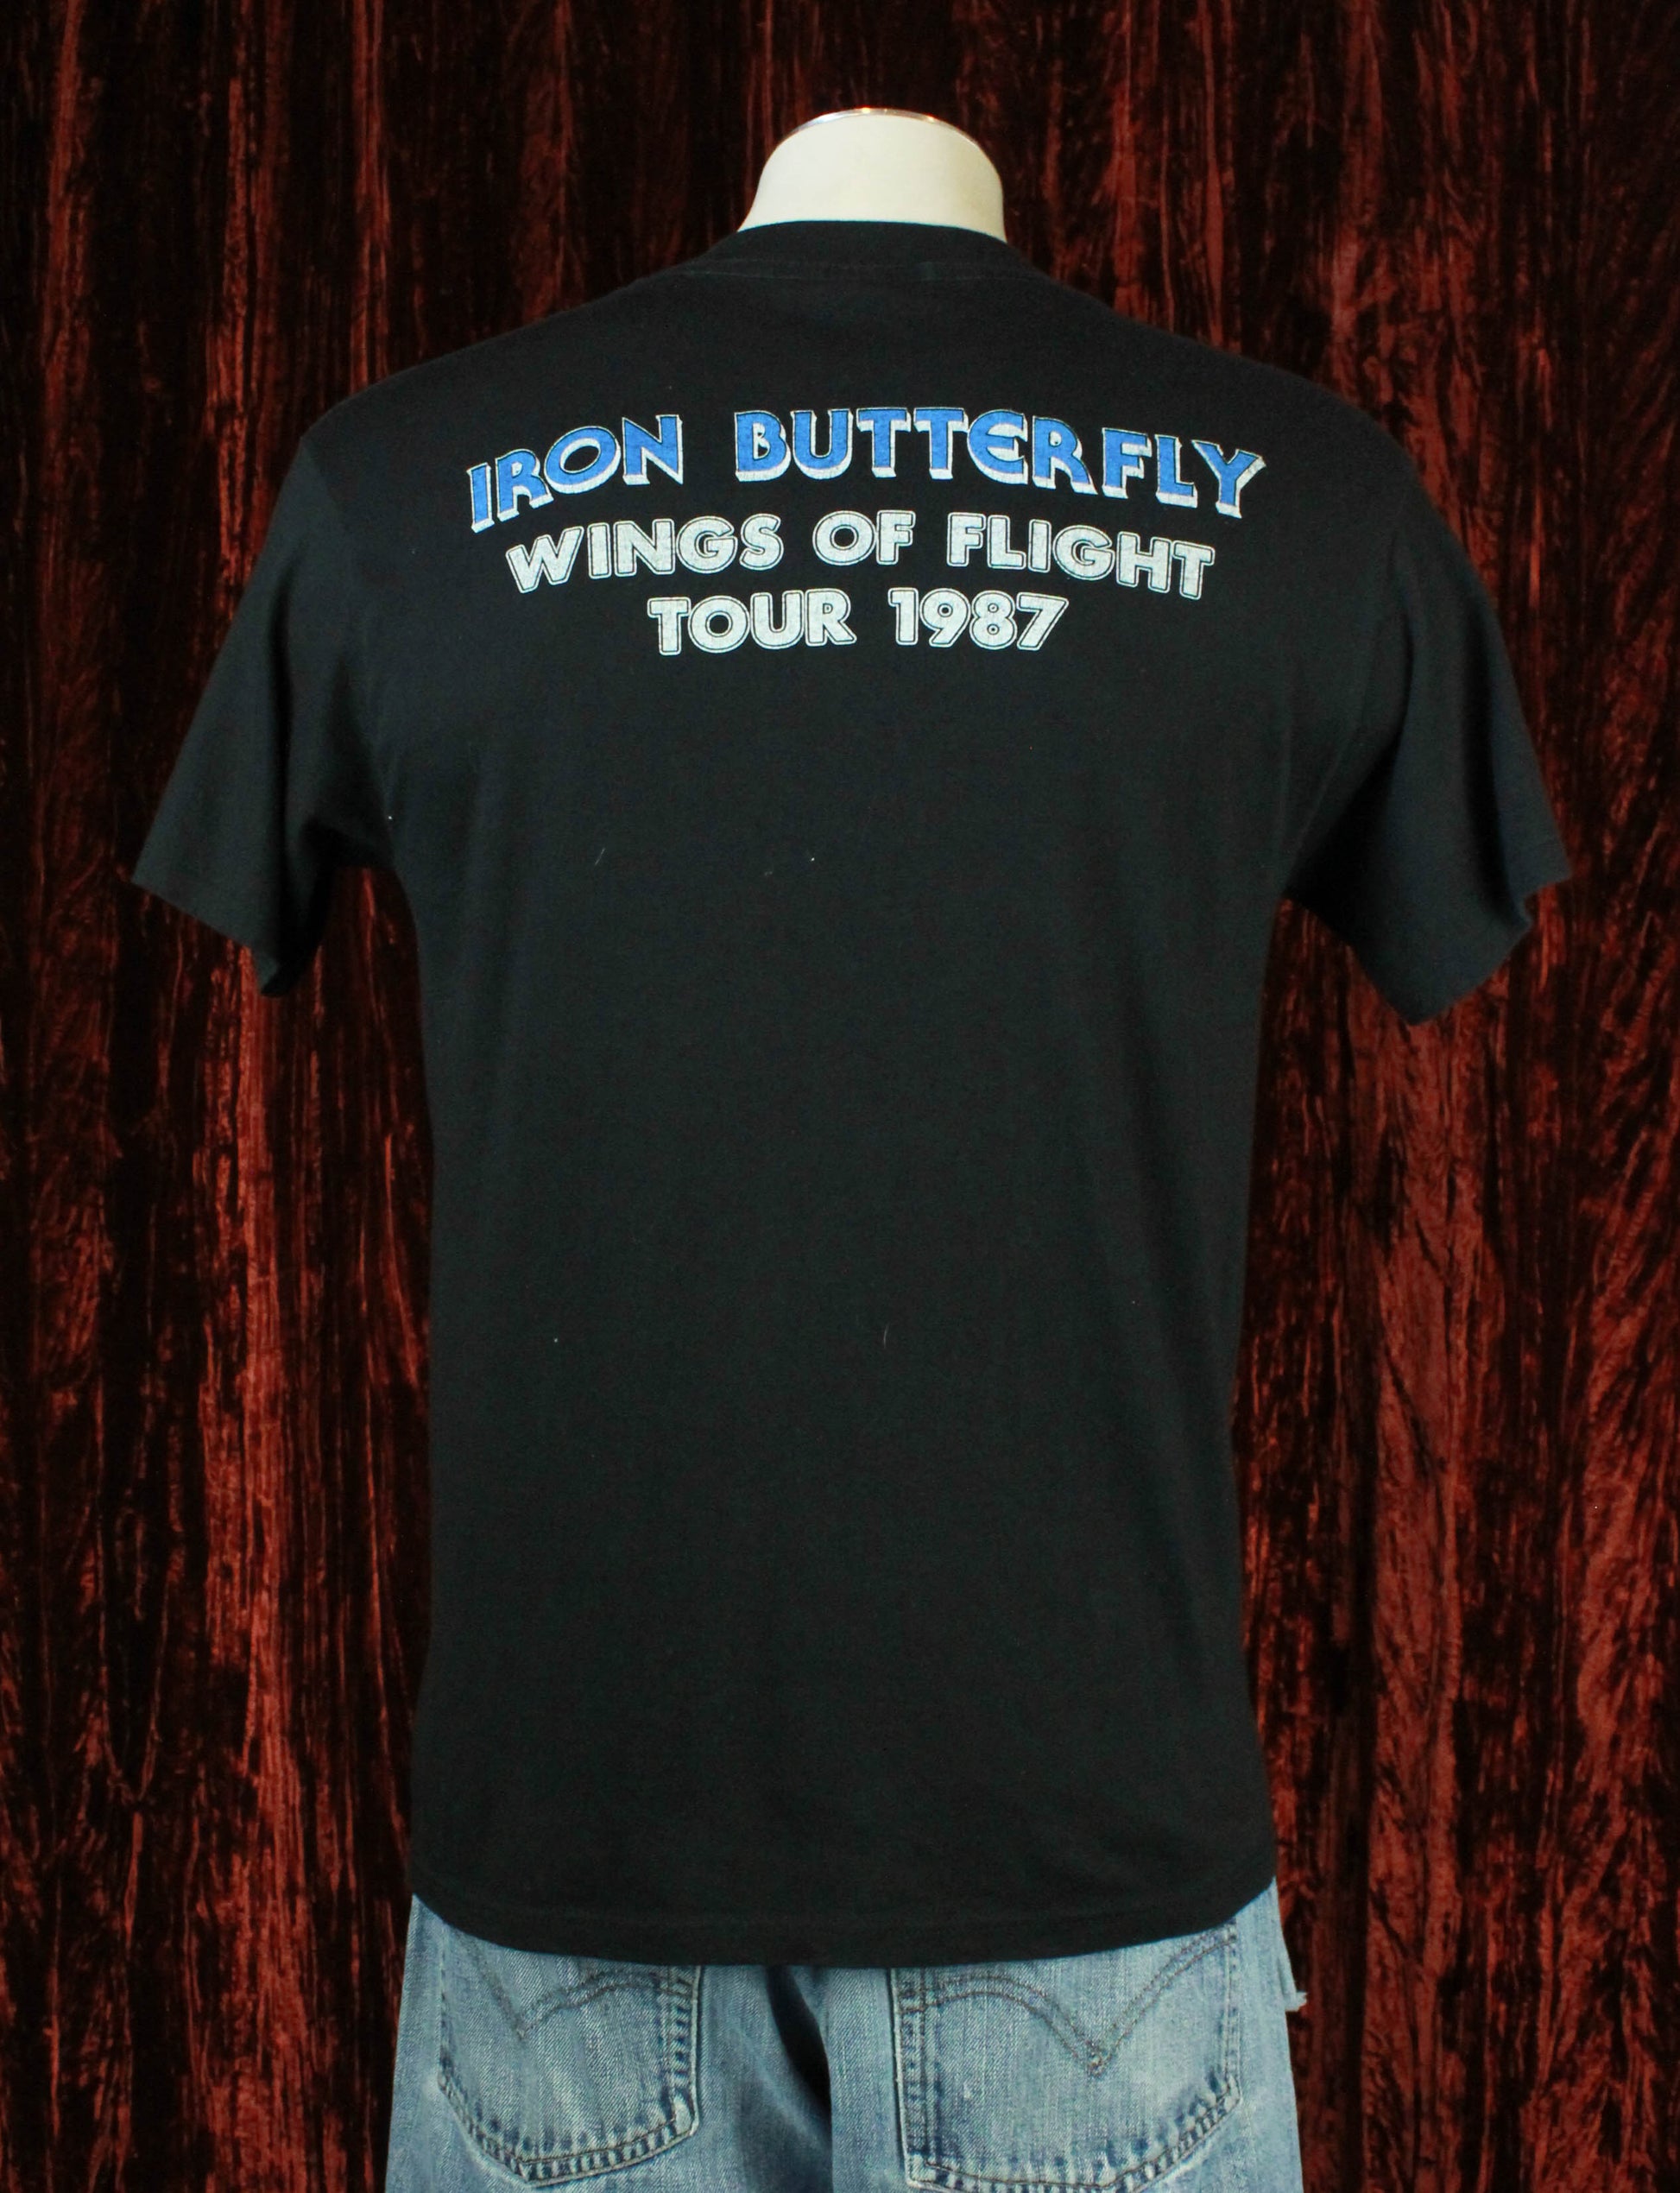 Vintage Iron Butterfly Concert T Shirt 1987 Wings Of Flight Tour - Large